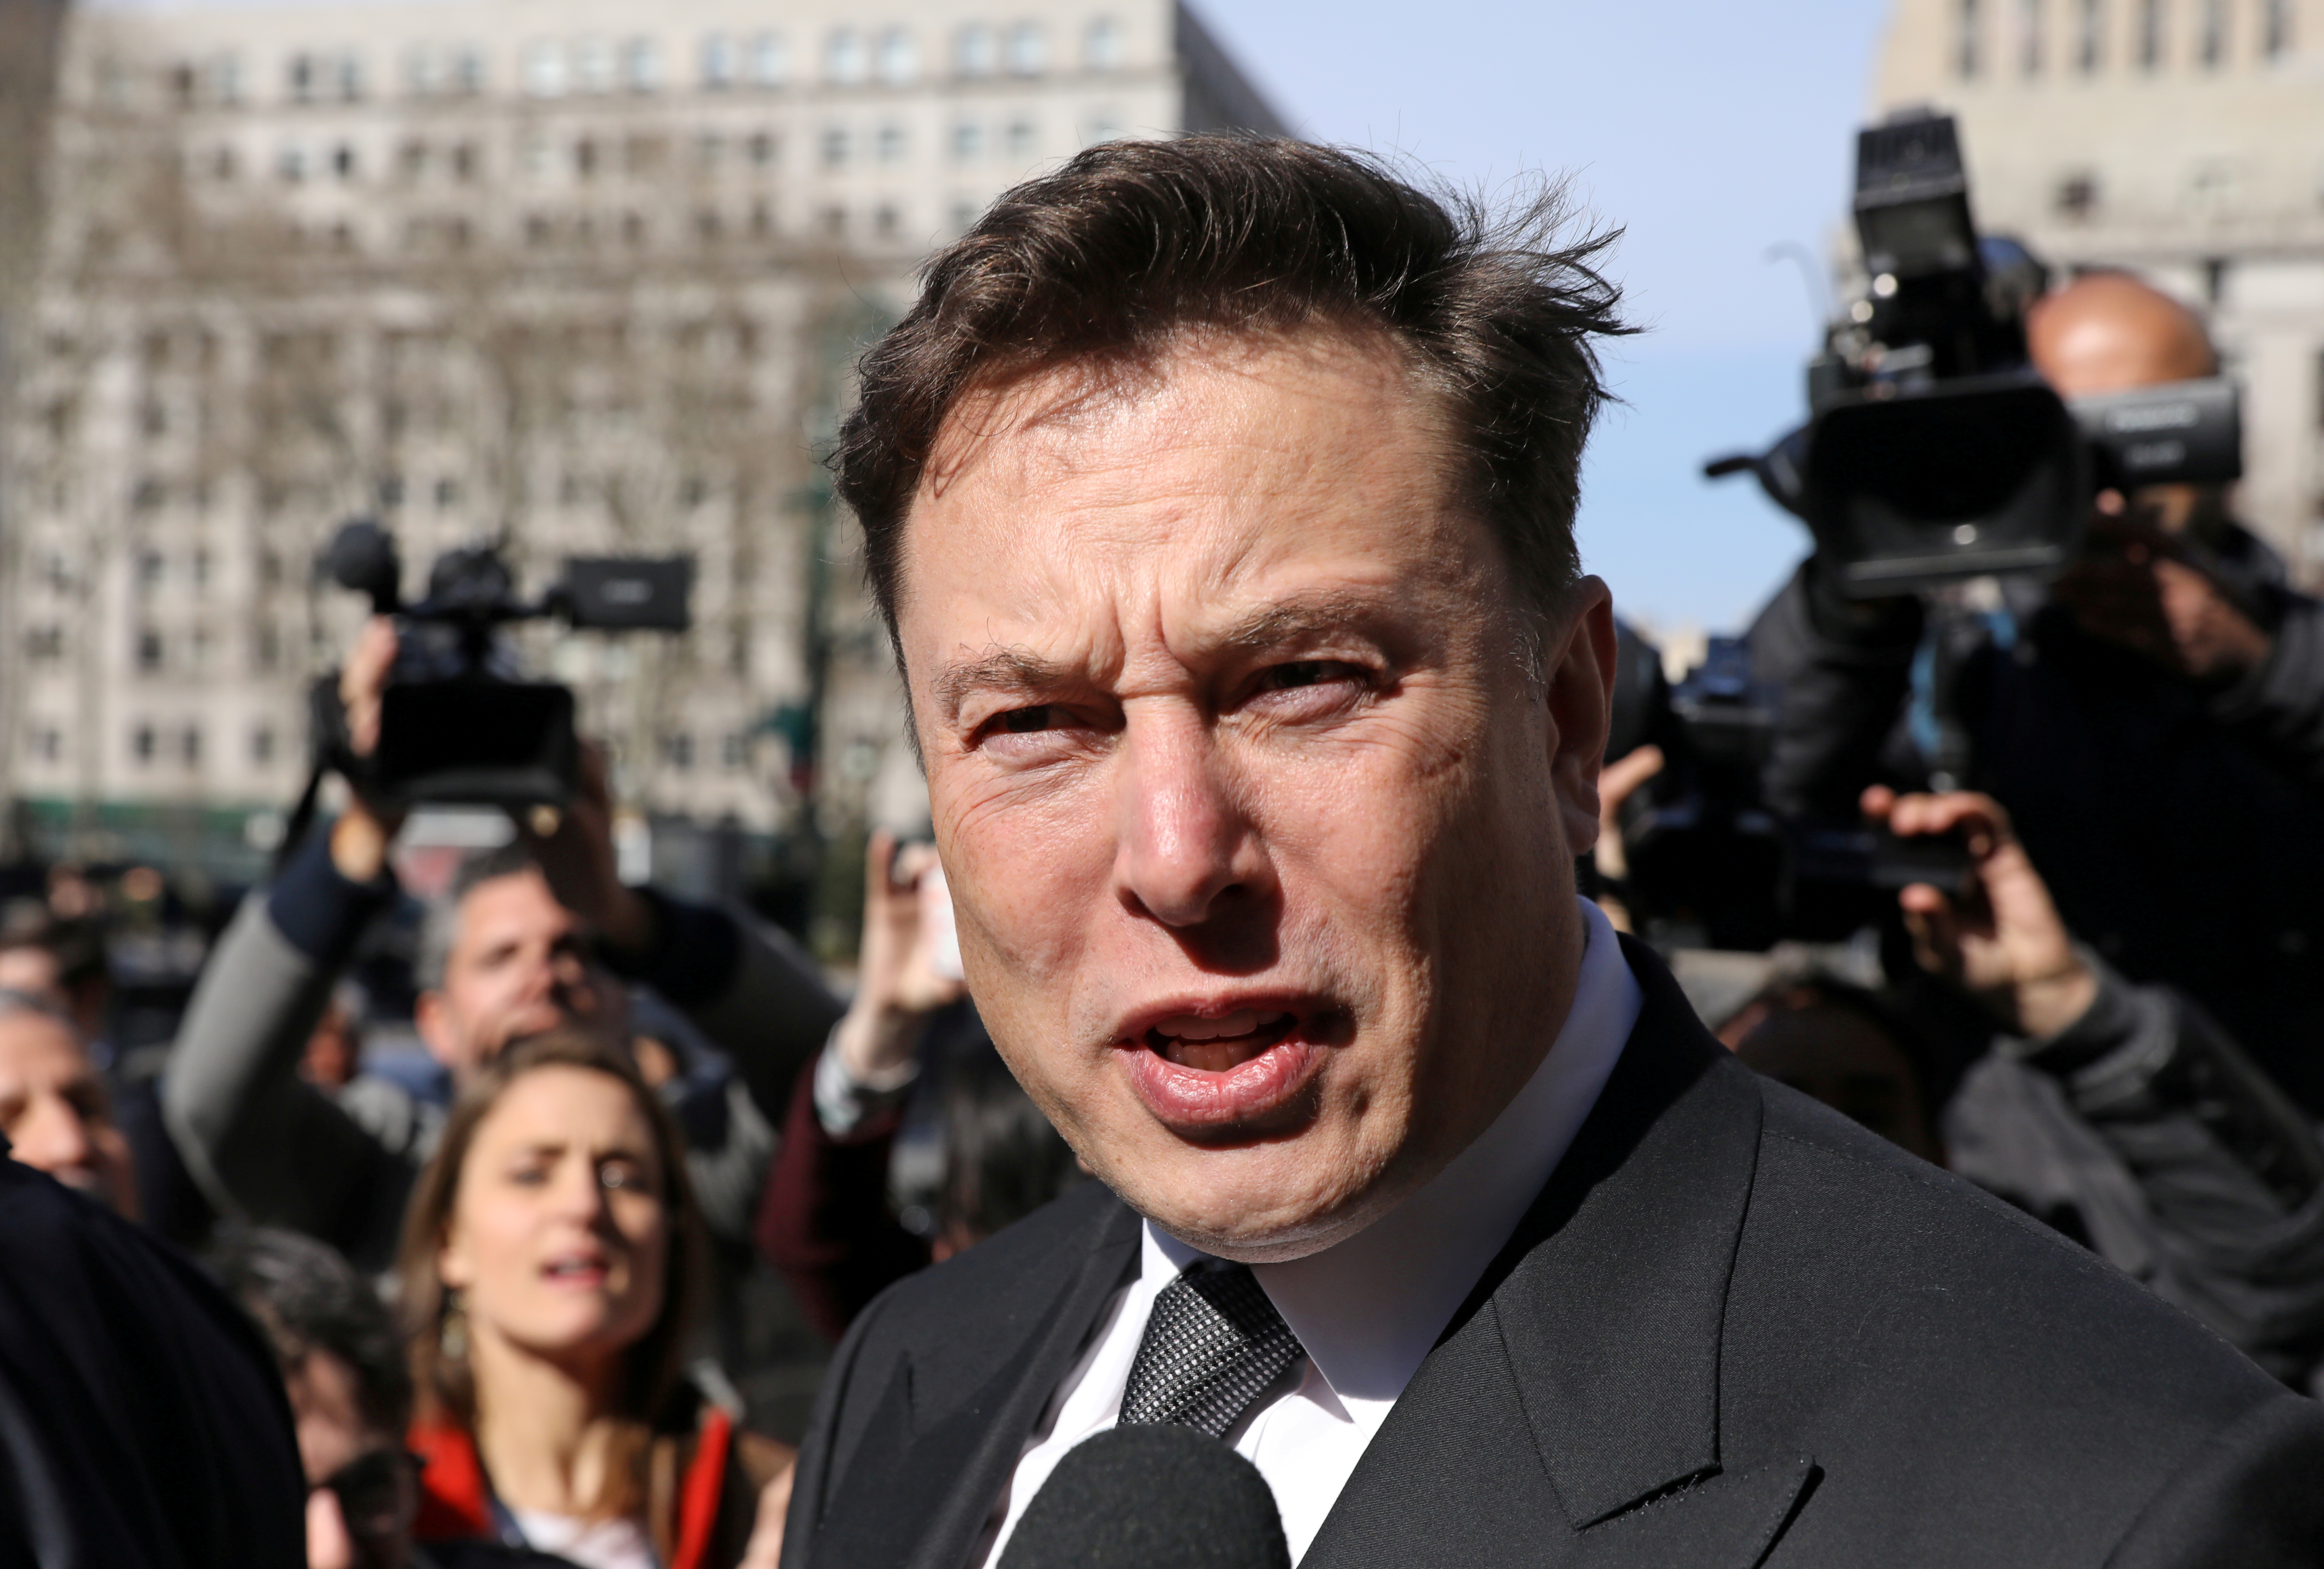 Tesla CEO Elon Musk leaves Manhattan federal court after a hearing on his fraud settlement with the Securities and Exchange Commission (SEC) in New York City, U.S. April 4, 2019. REUTERS/Brendan McDermid